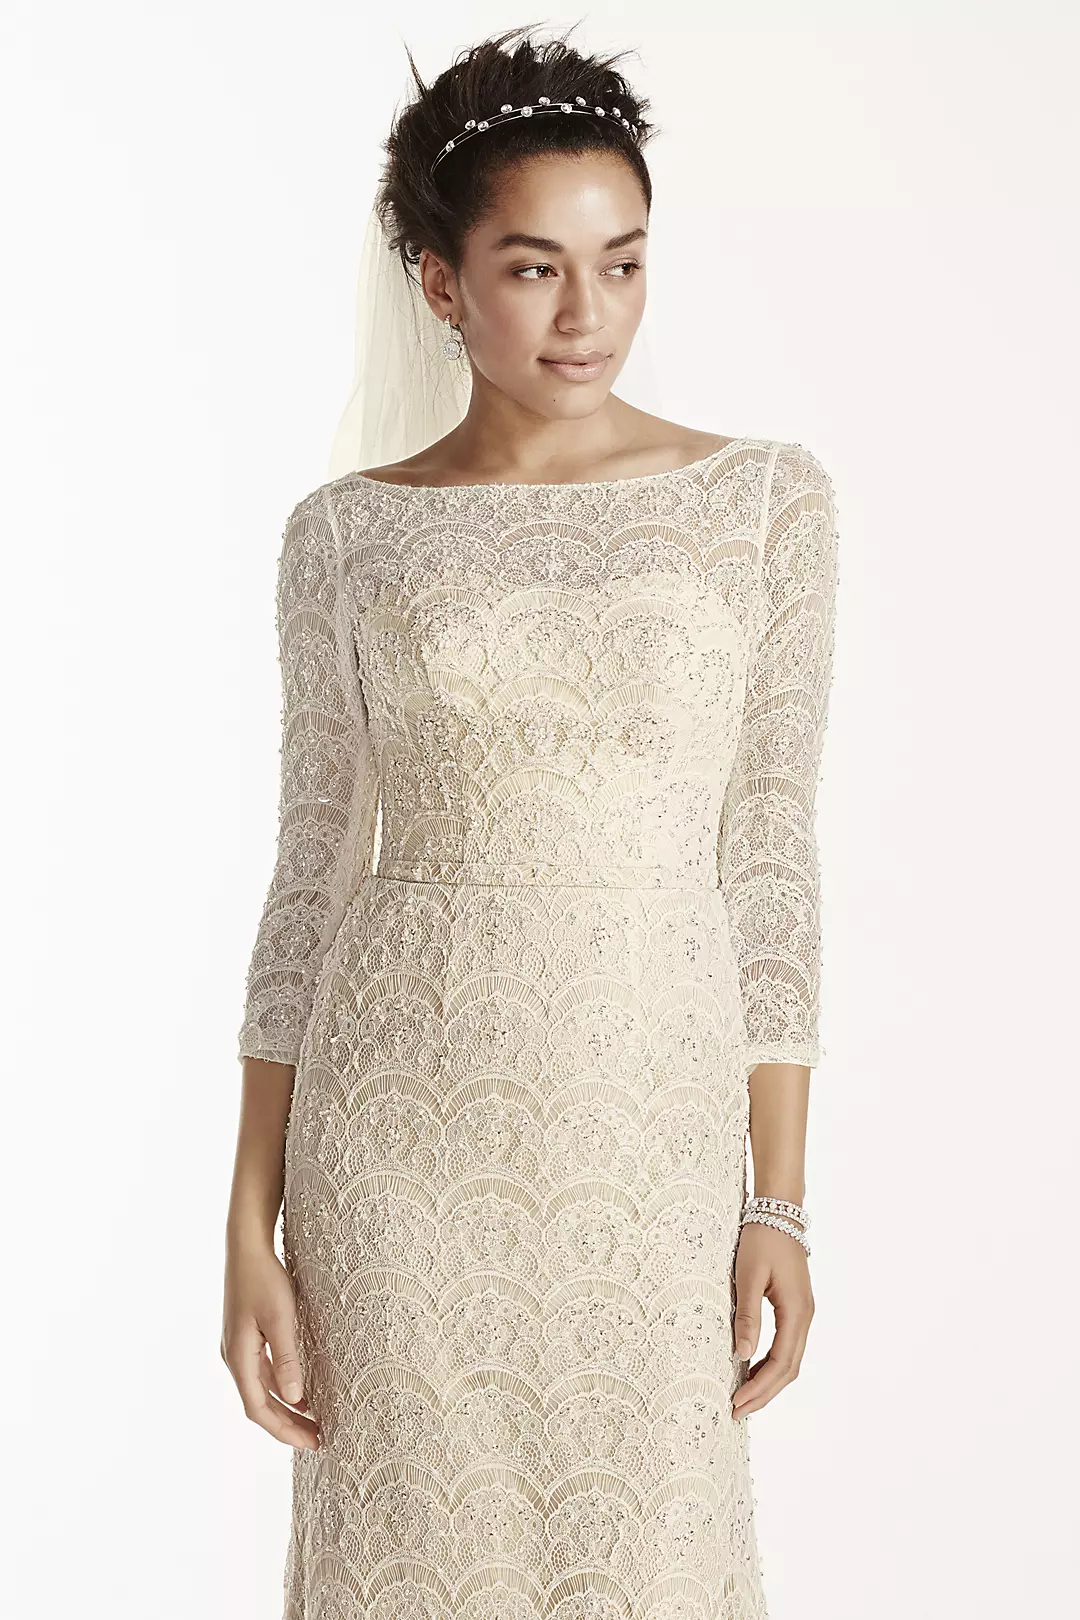 As-Is Petite Beaded Lace 3/4 Sleeved Wedding Dress Image 3